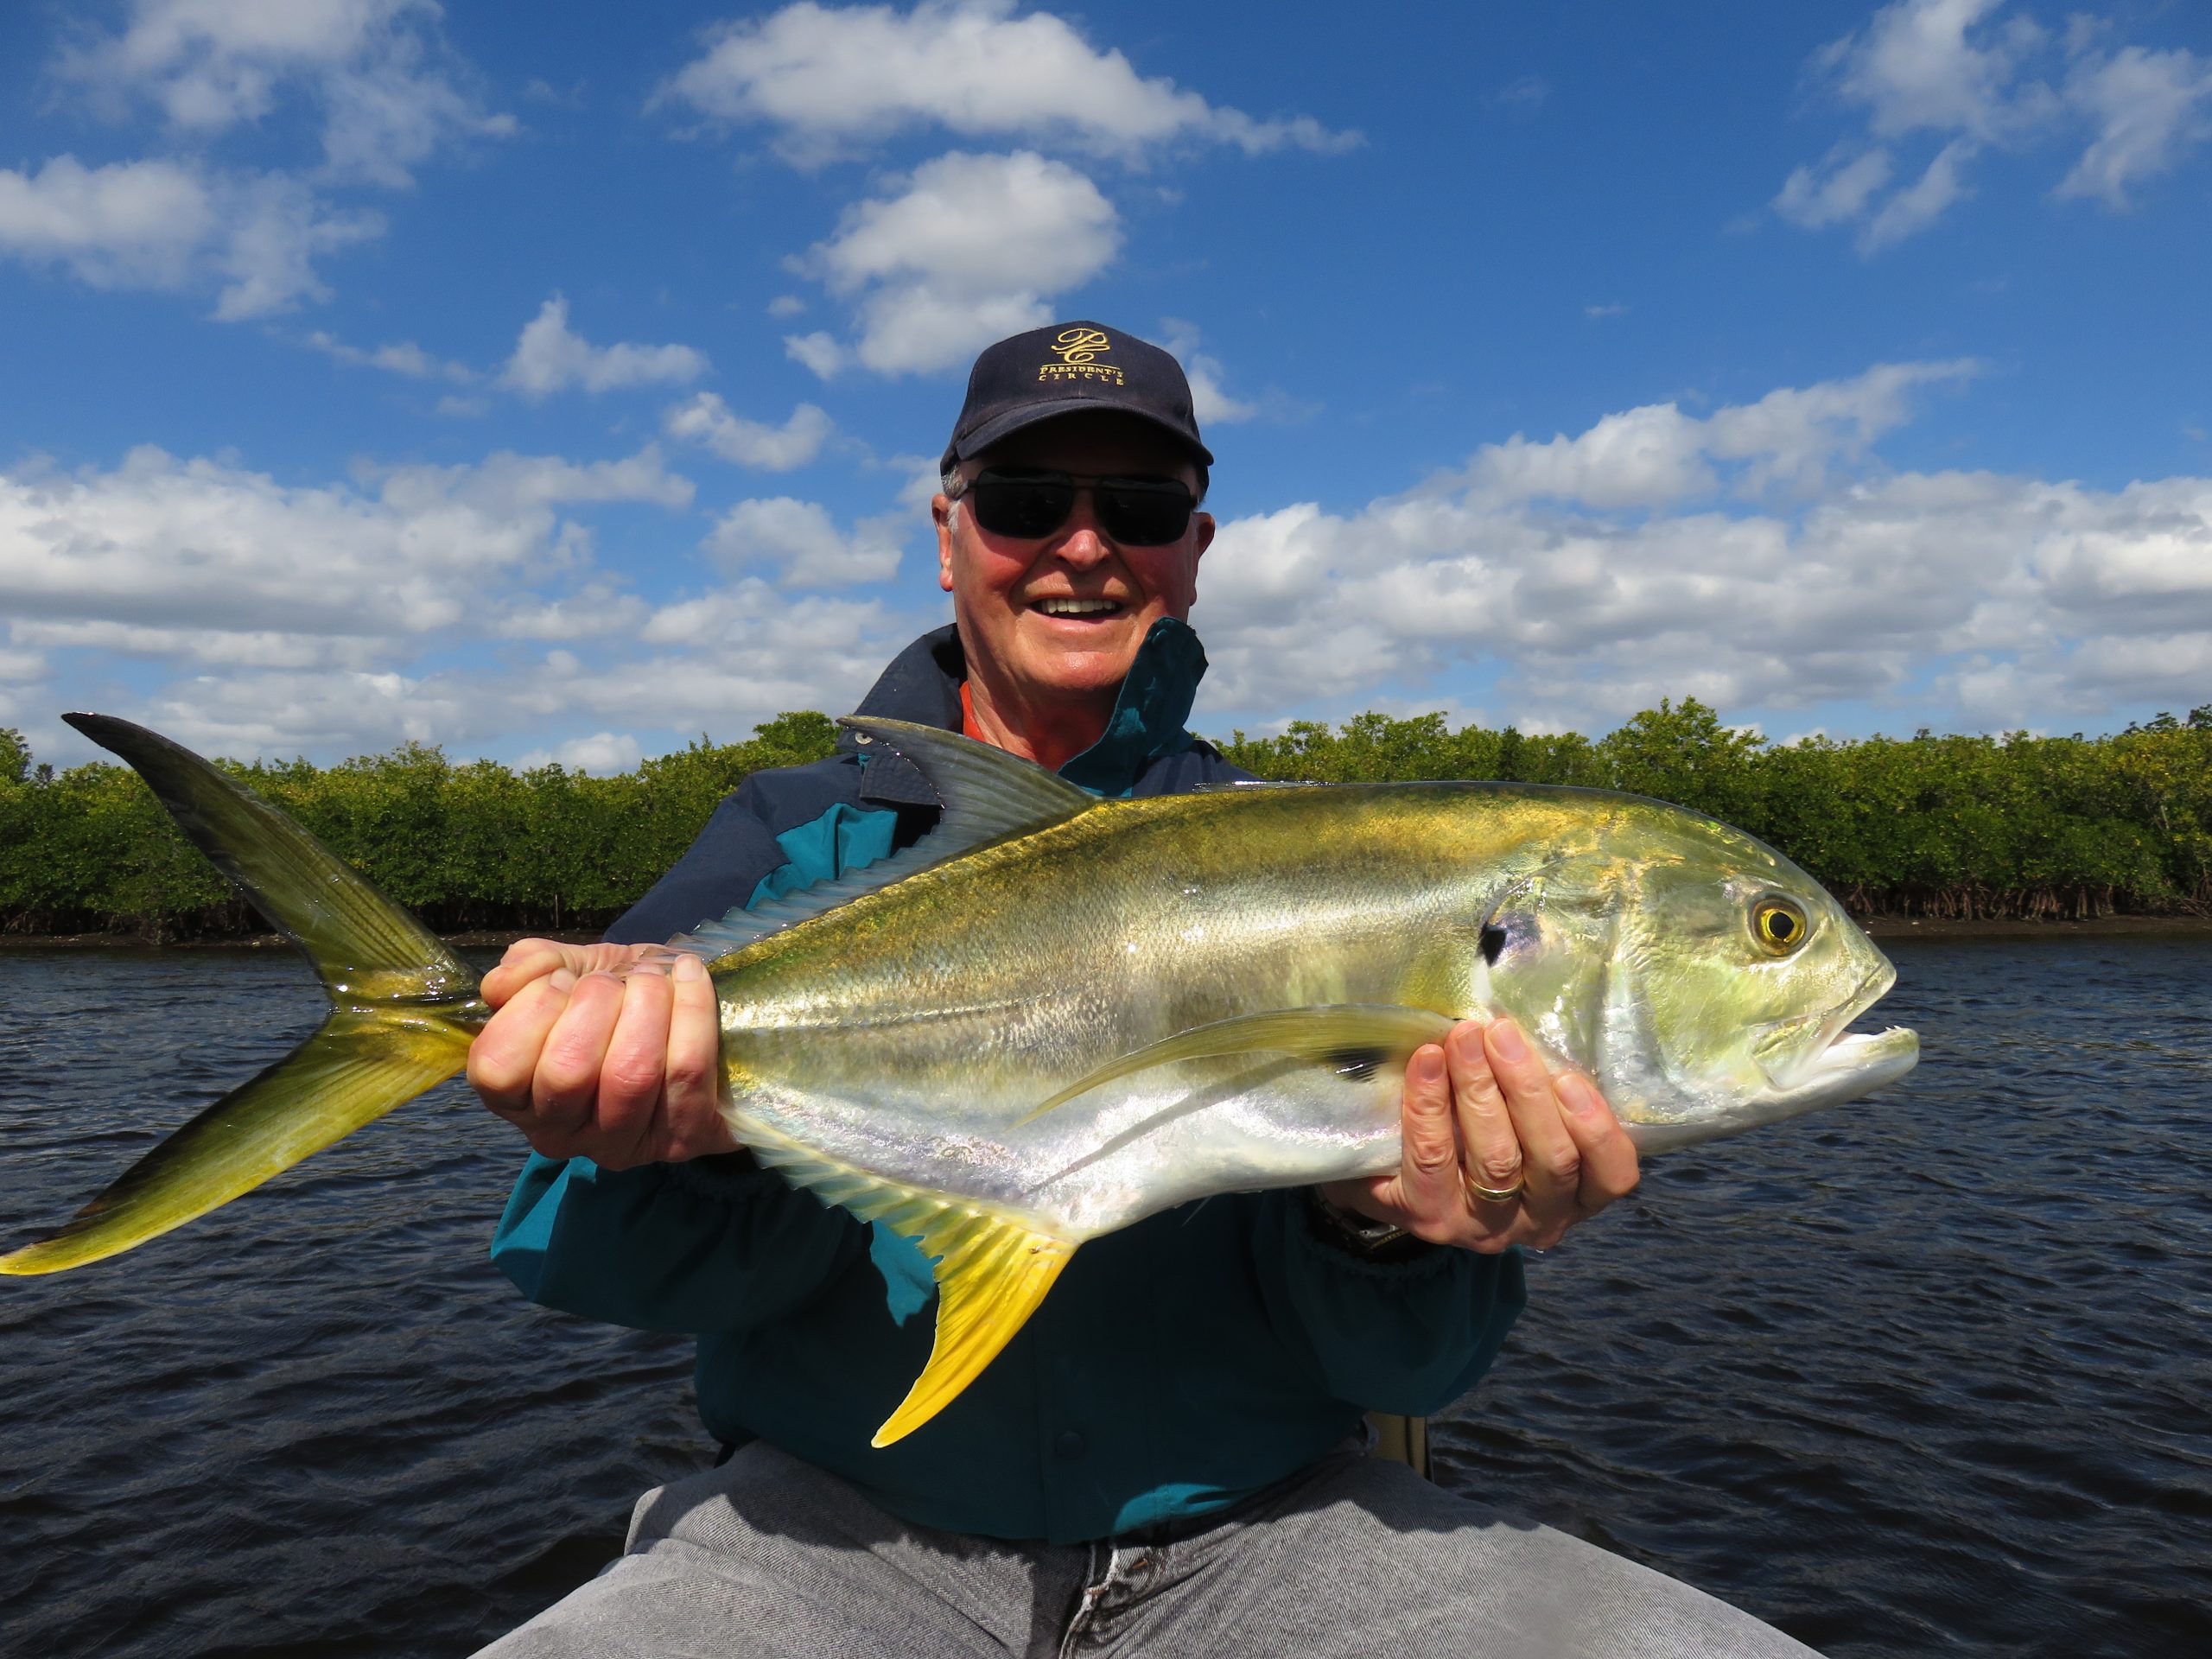 Battle of the river fishes: Snook versus bass